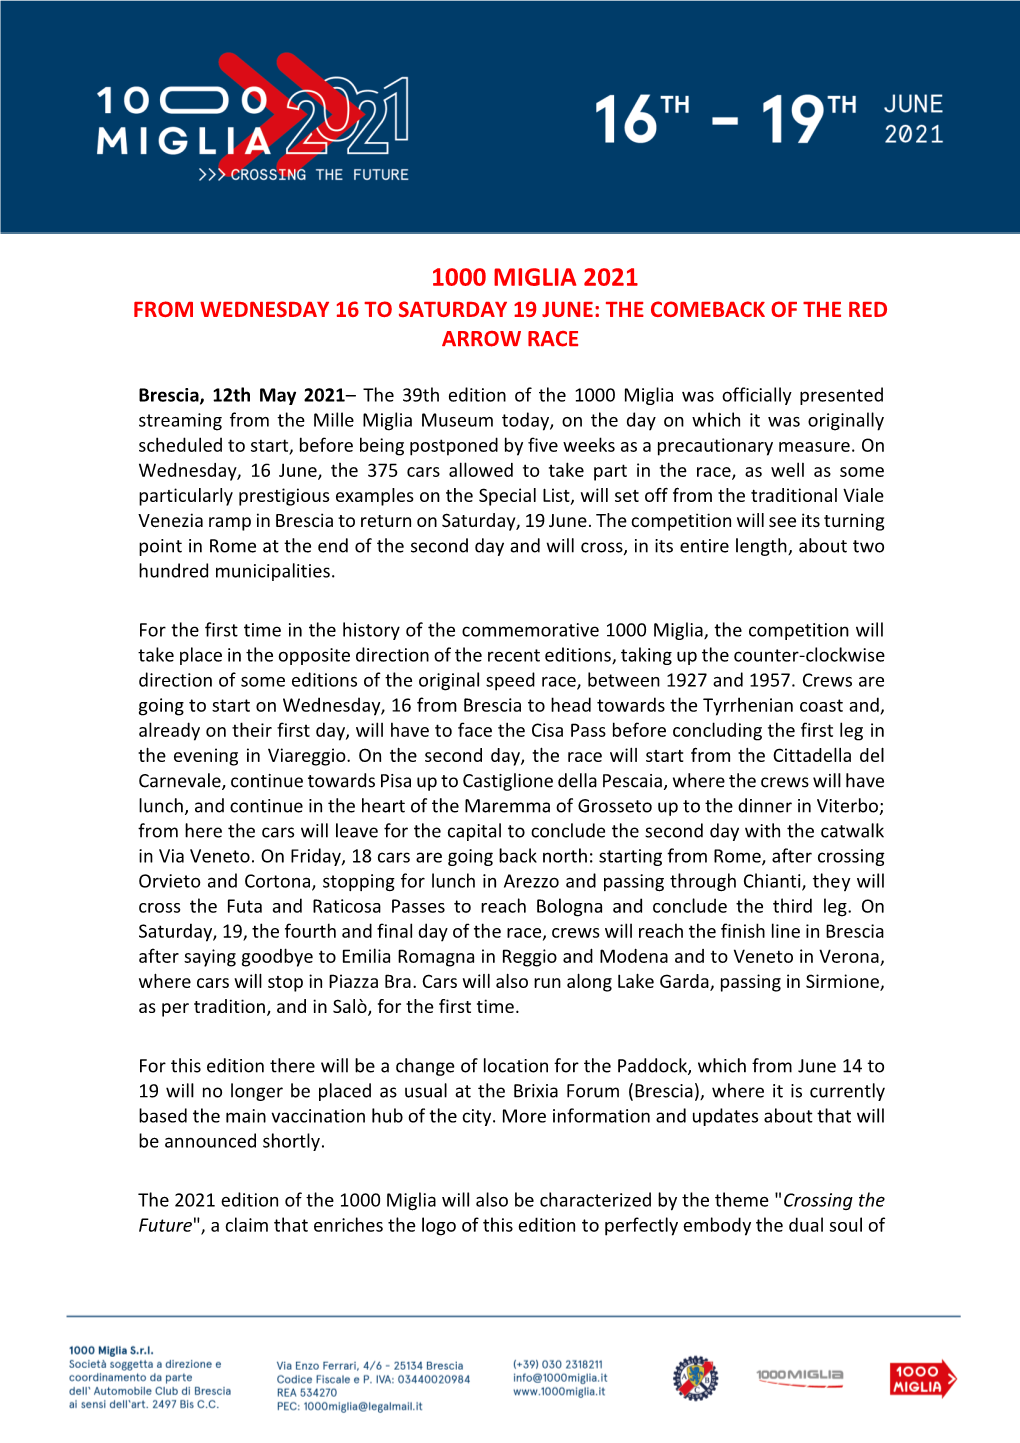 1000 Miglia 2021 from Wednesday 16 to Saturday 19 June: the Comeback of the Red Arrow Race